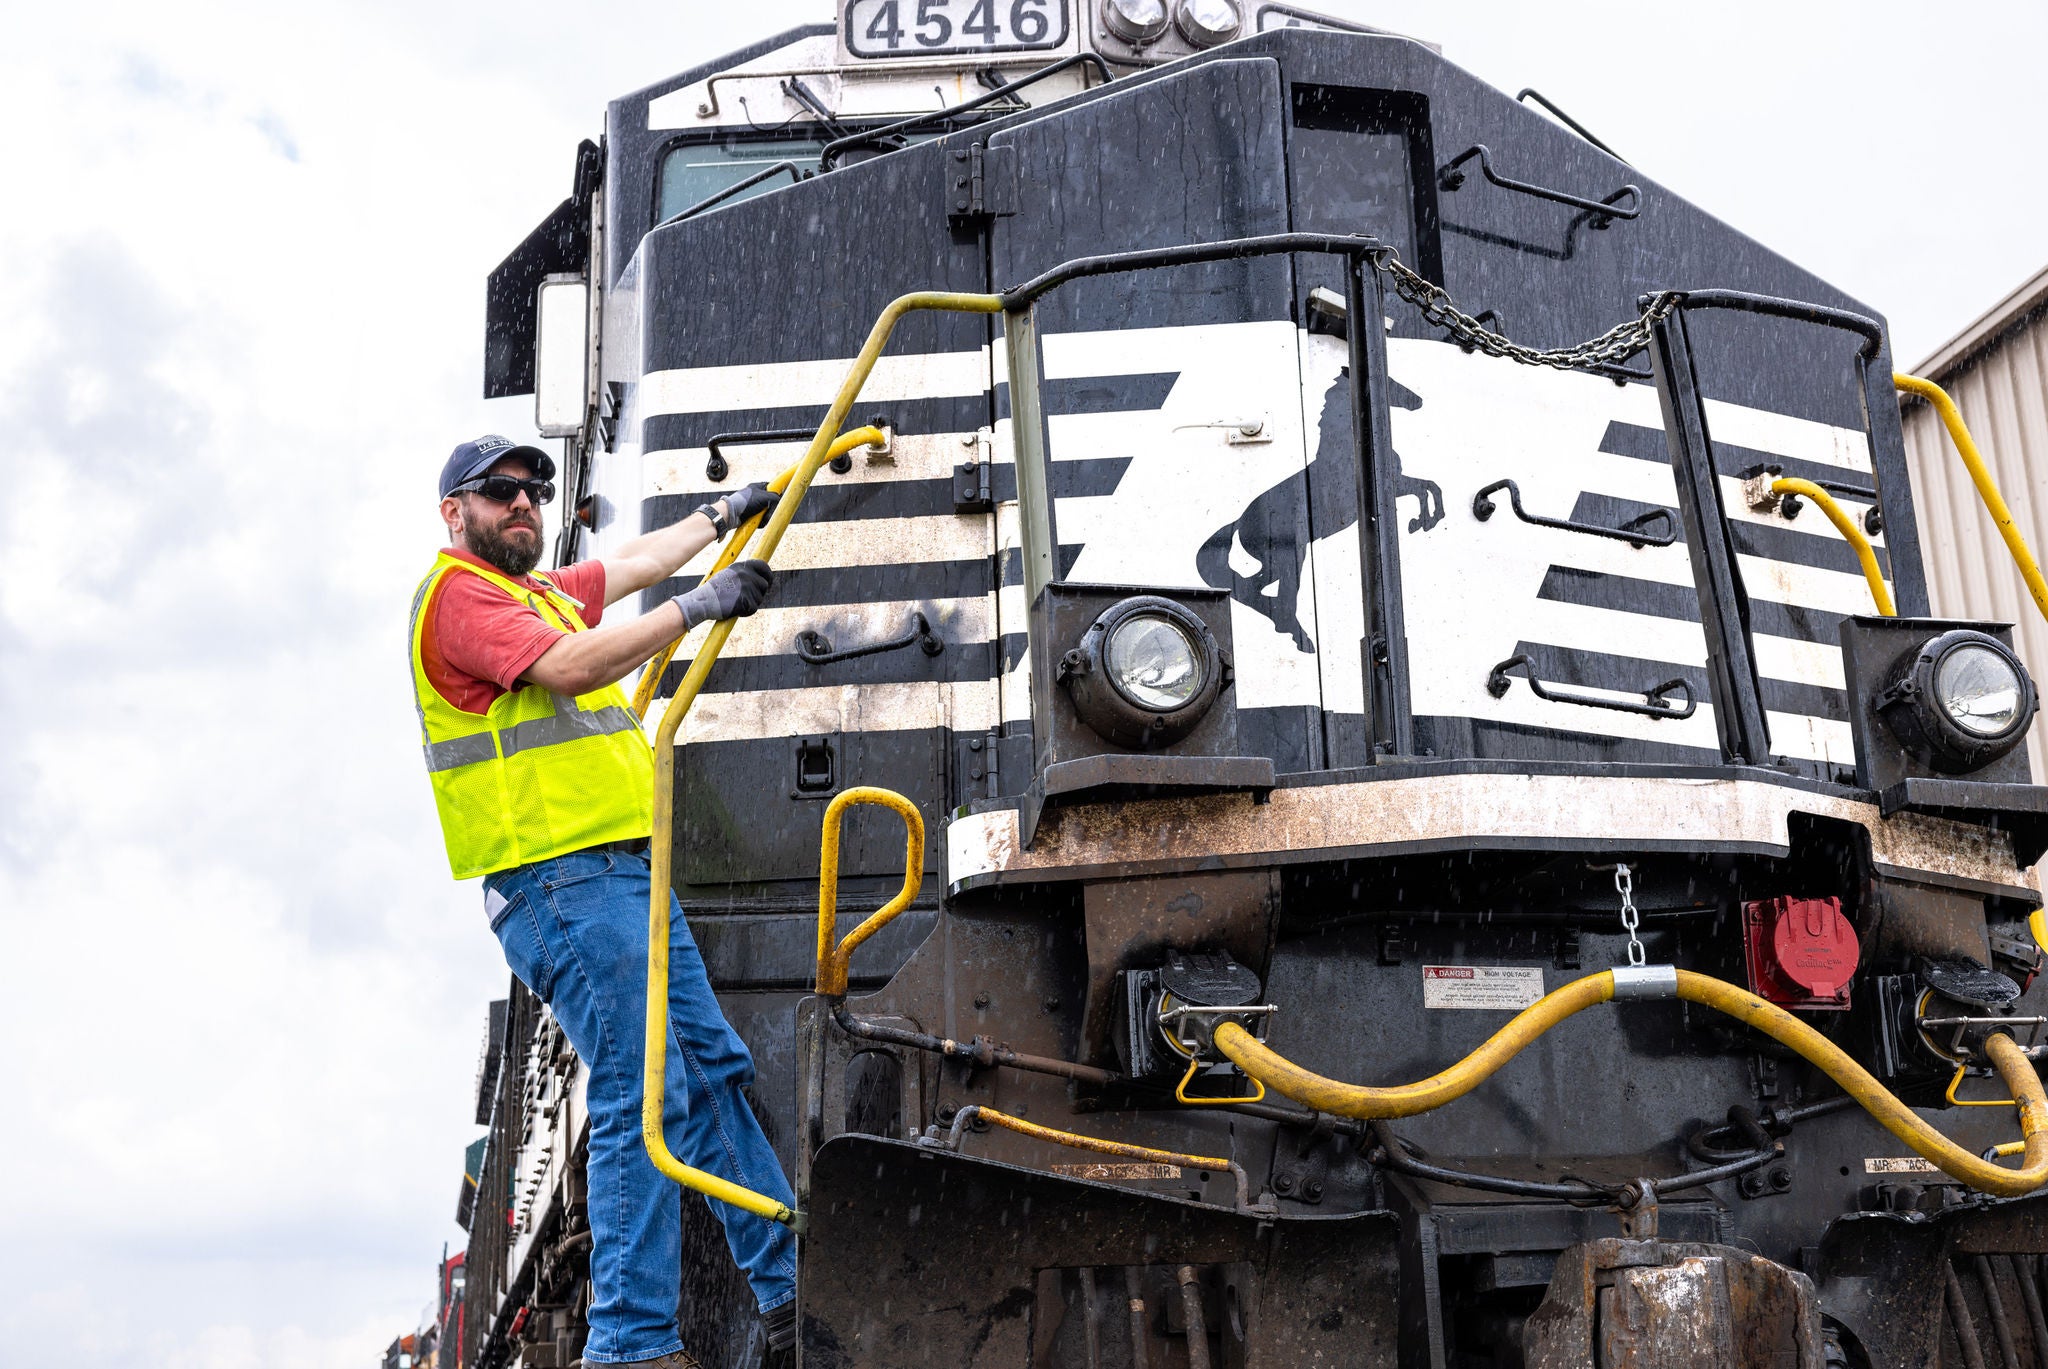 norfolk southern craft employee in railway job and dispatcher job holding on locomotive looking out